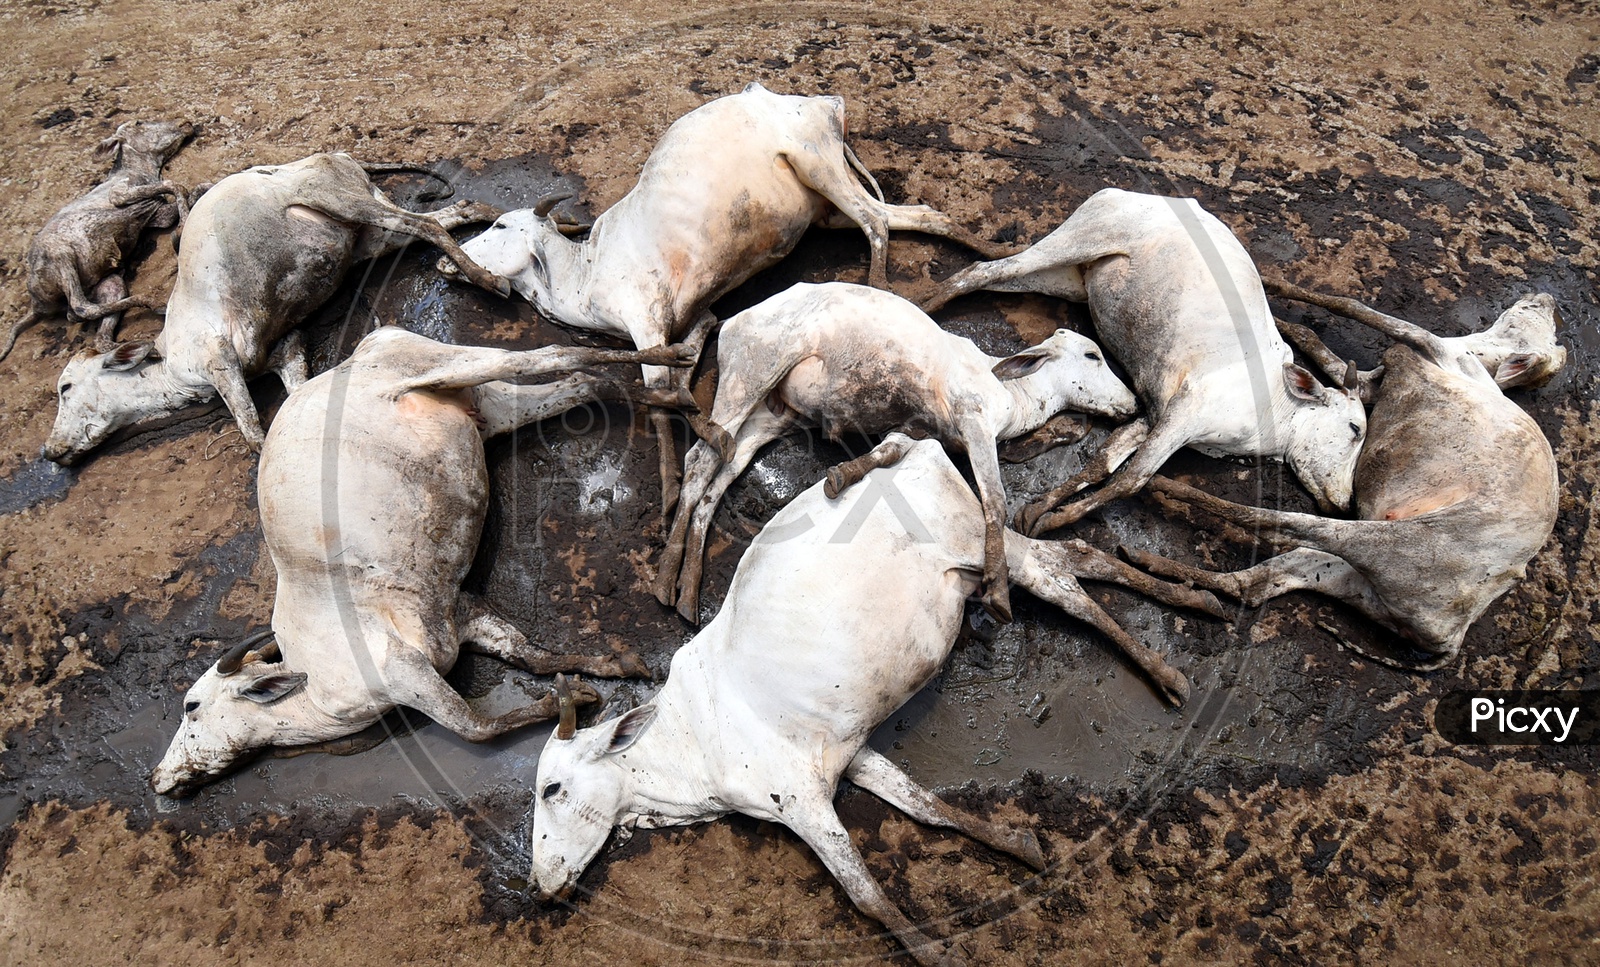 they fell one after another. At least 100 cows died at a “Gaushala”